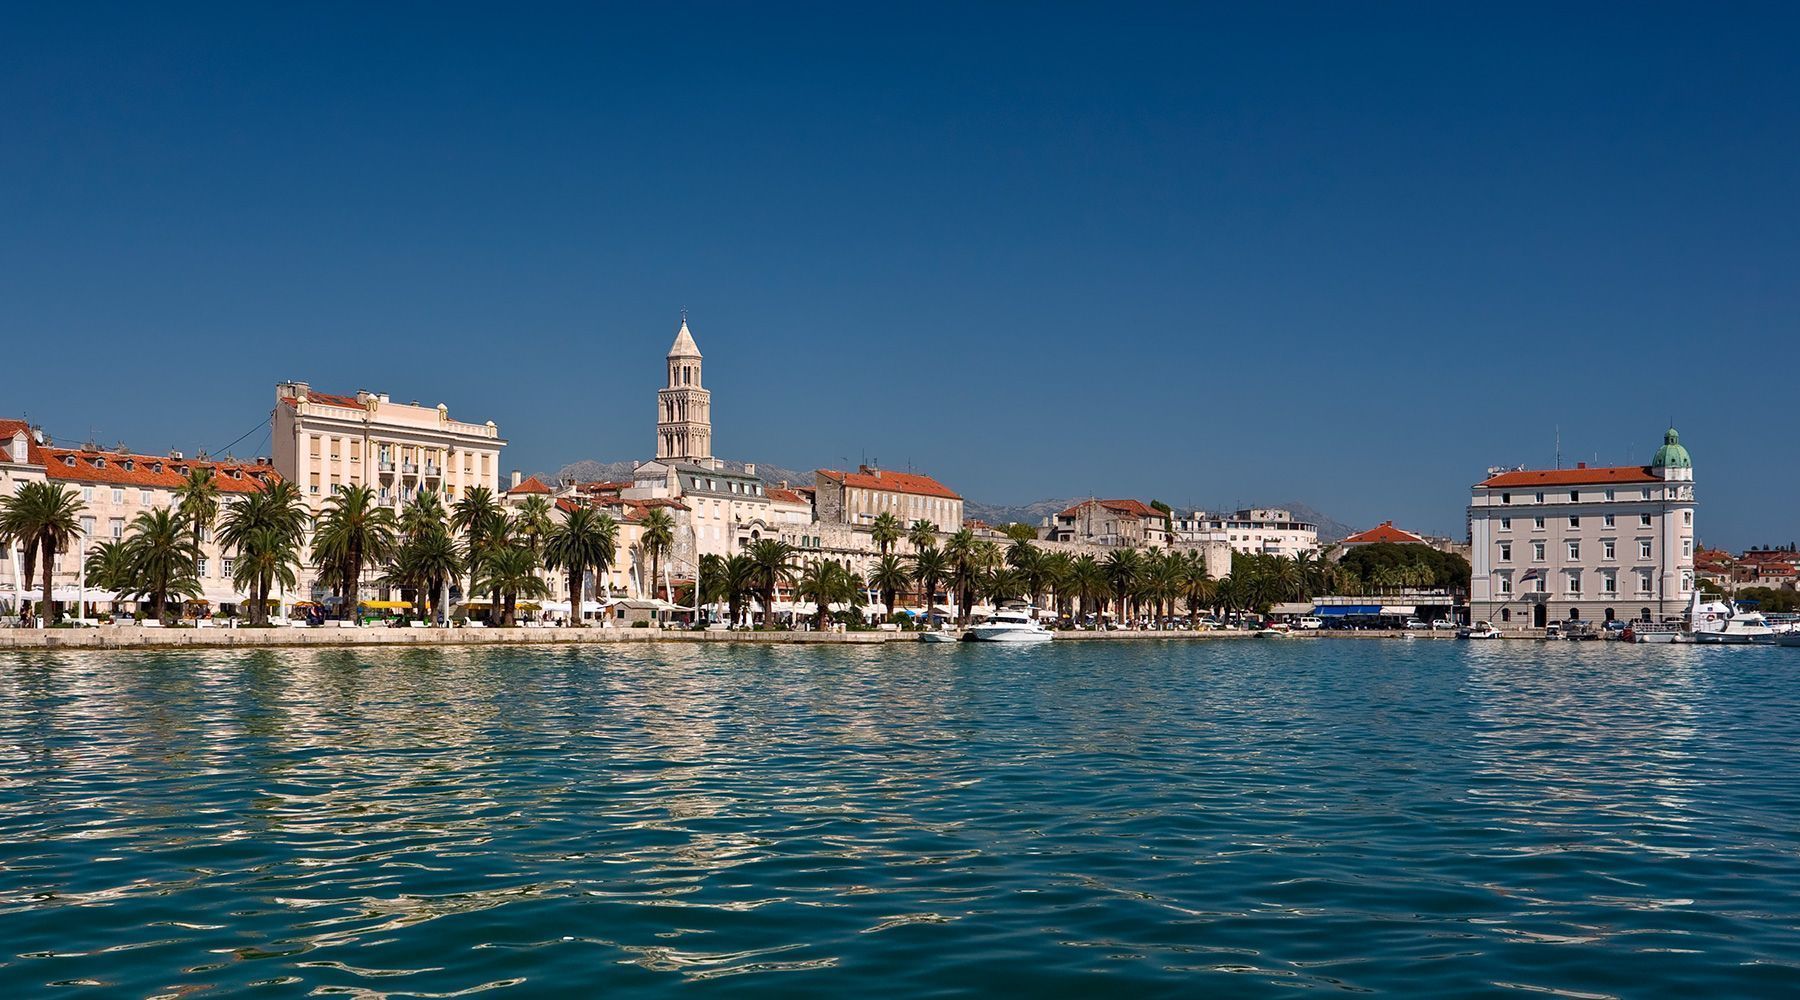 Harbour and Old town view of Split, Croaita